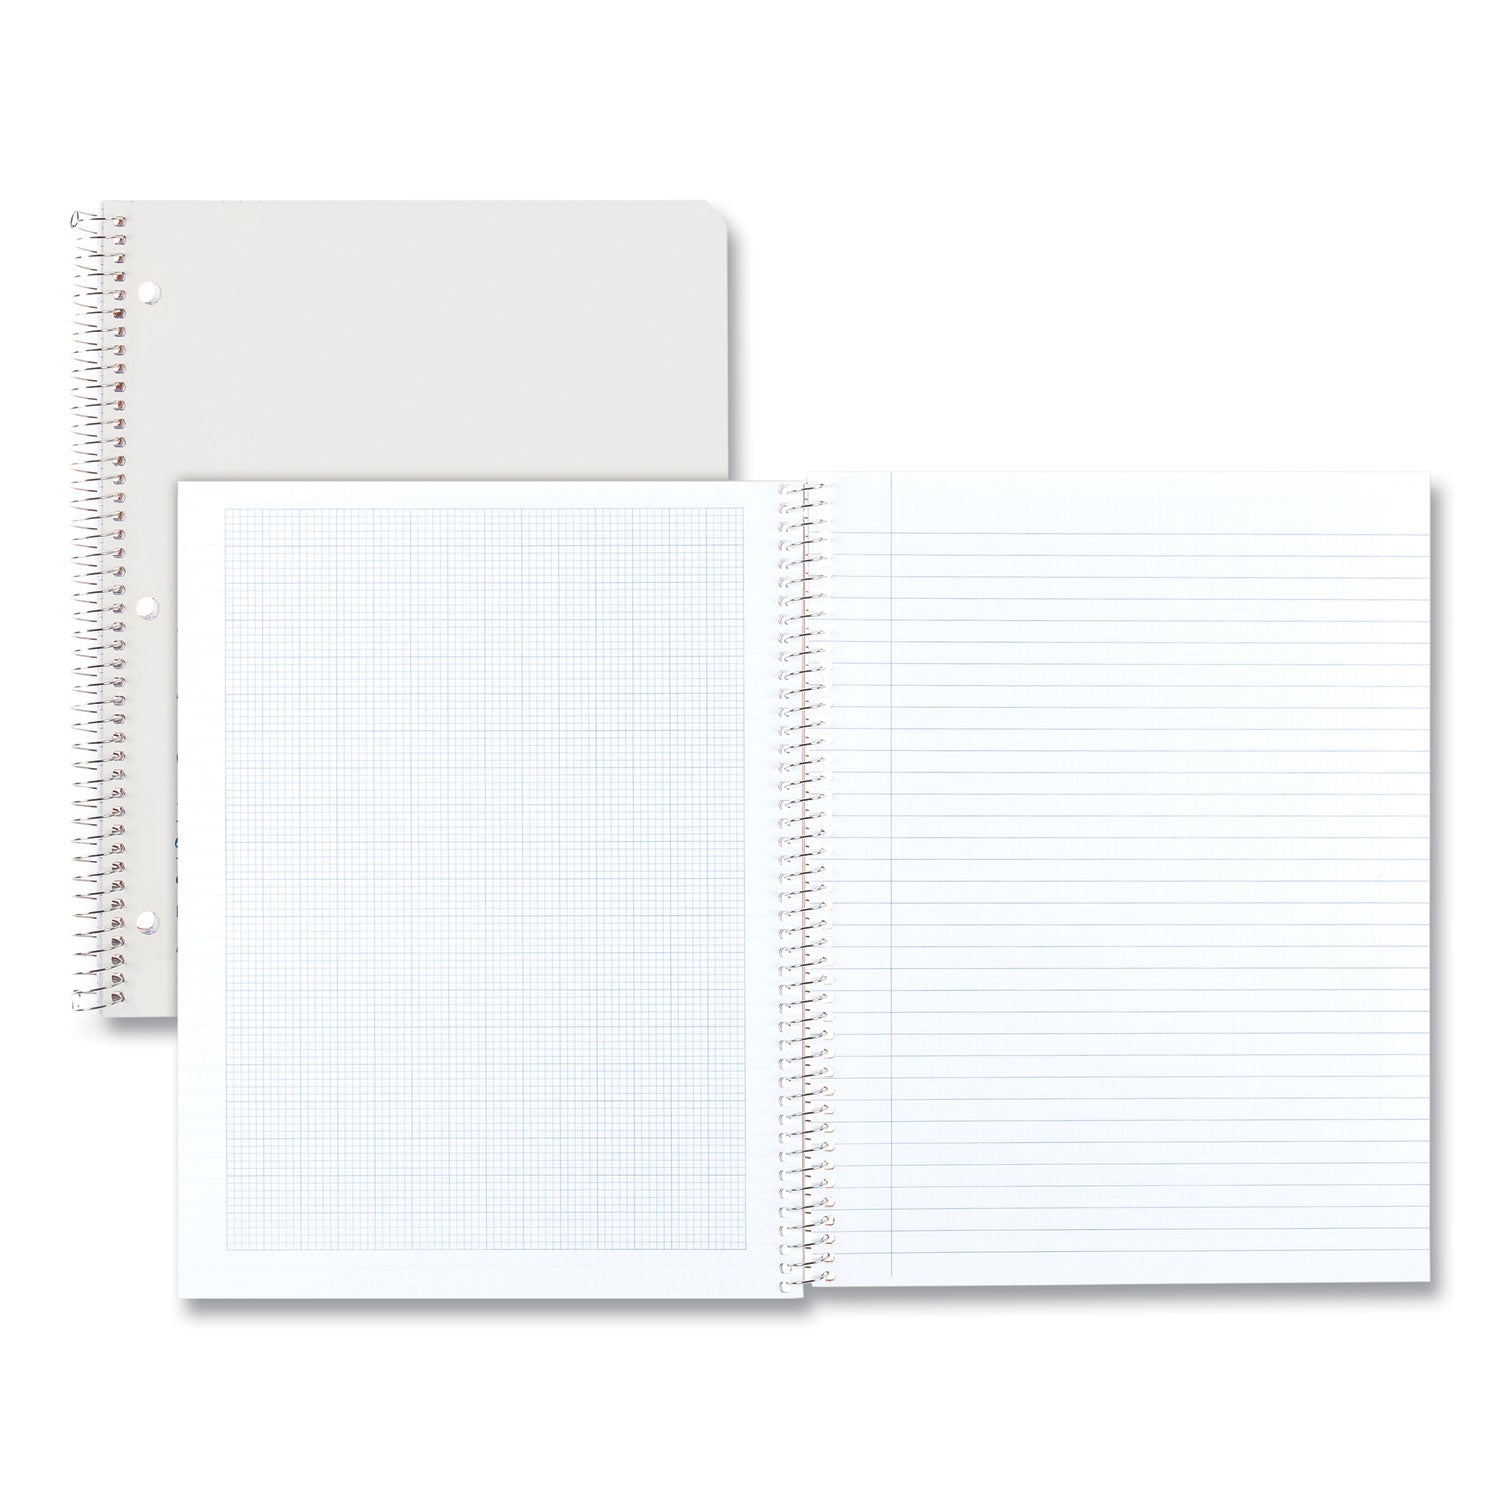 Engineering and Science Notebook, Quadrille Rule (10 sq/in), White Cover, (60) 11 x 8.5 Sheets - 